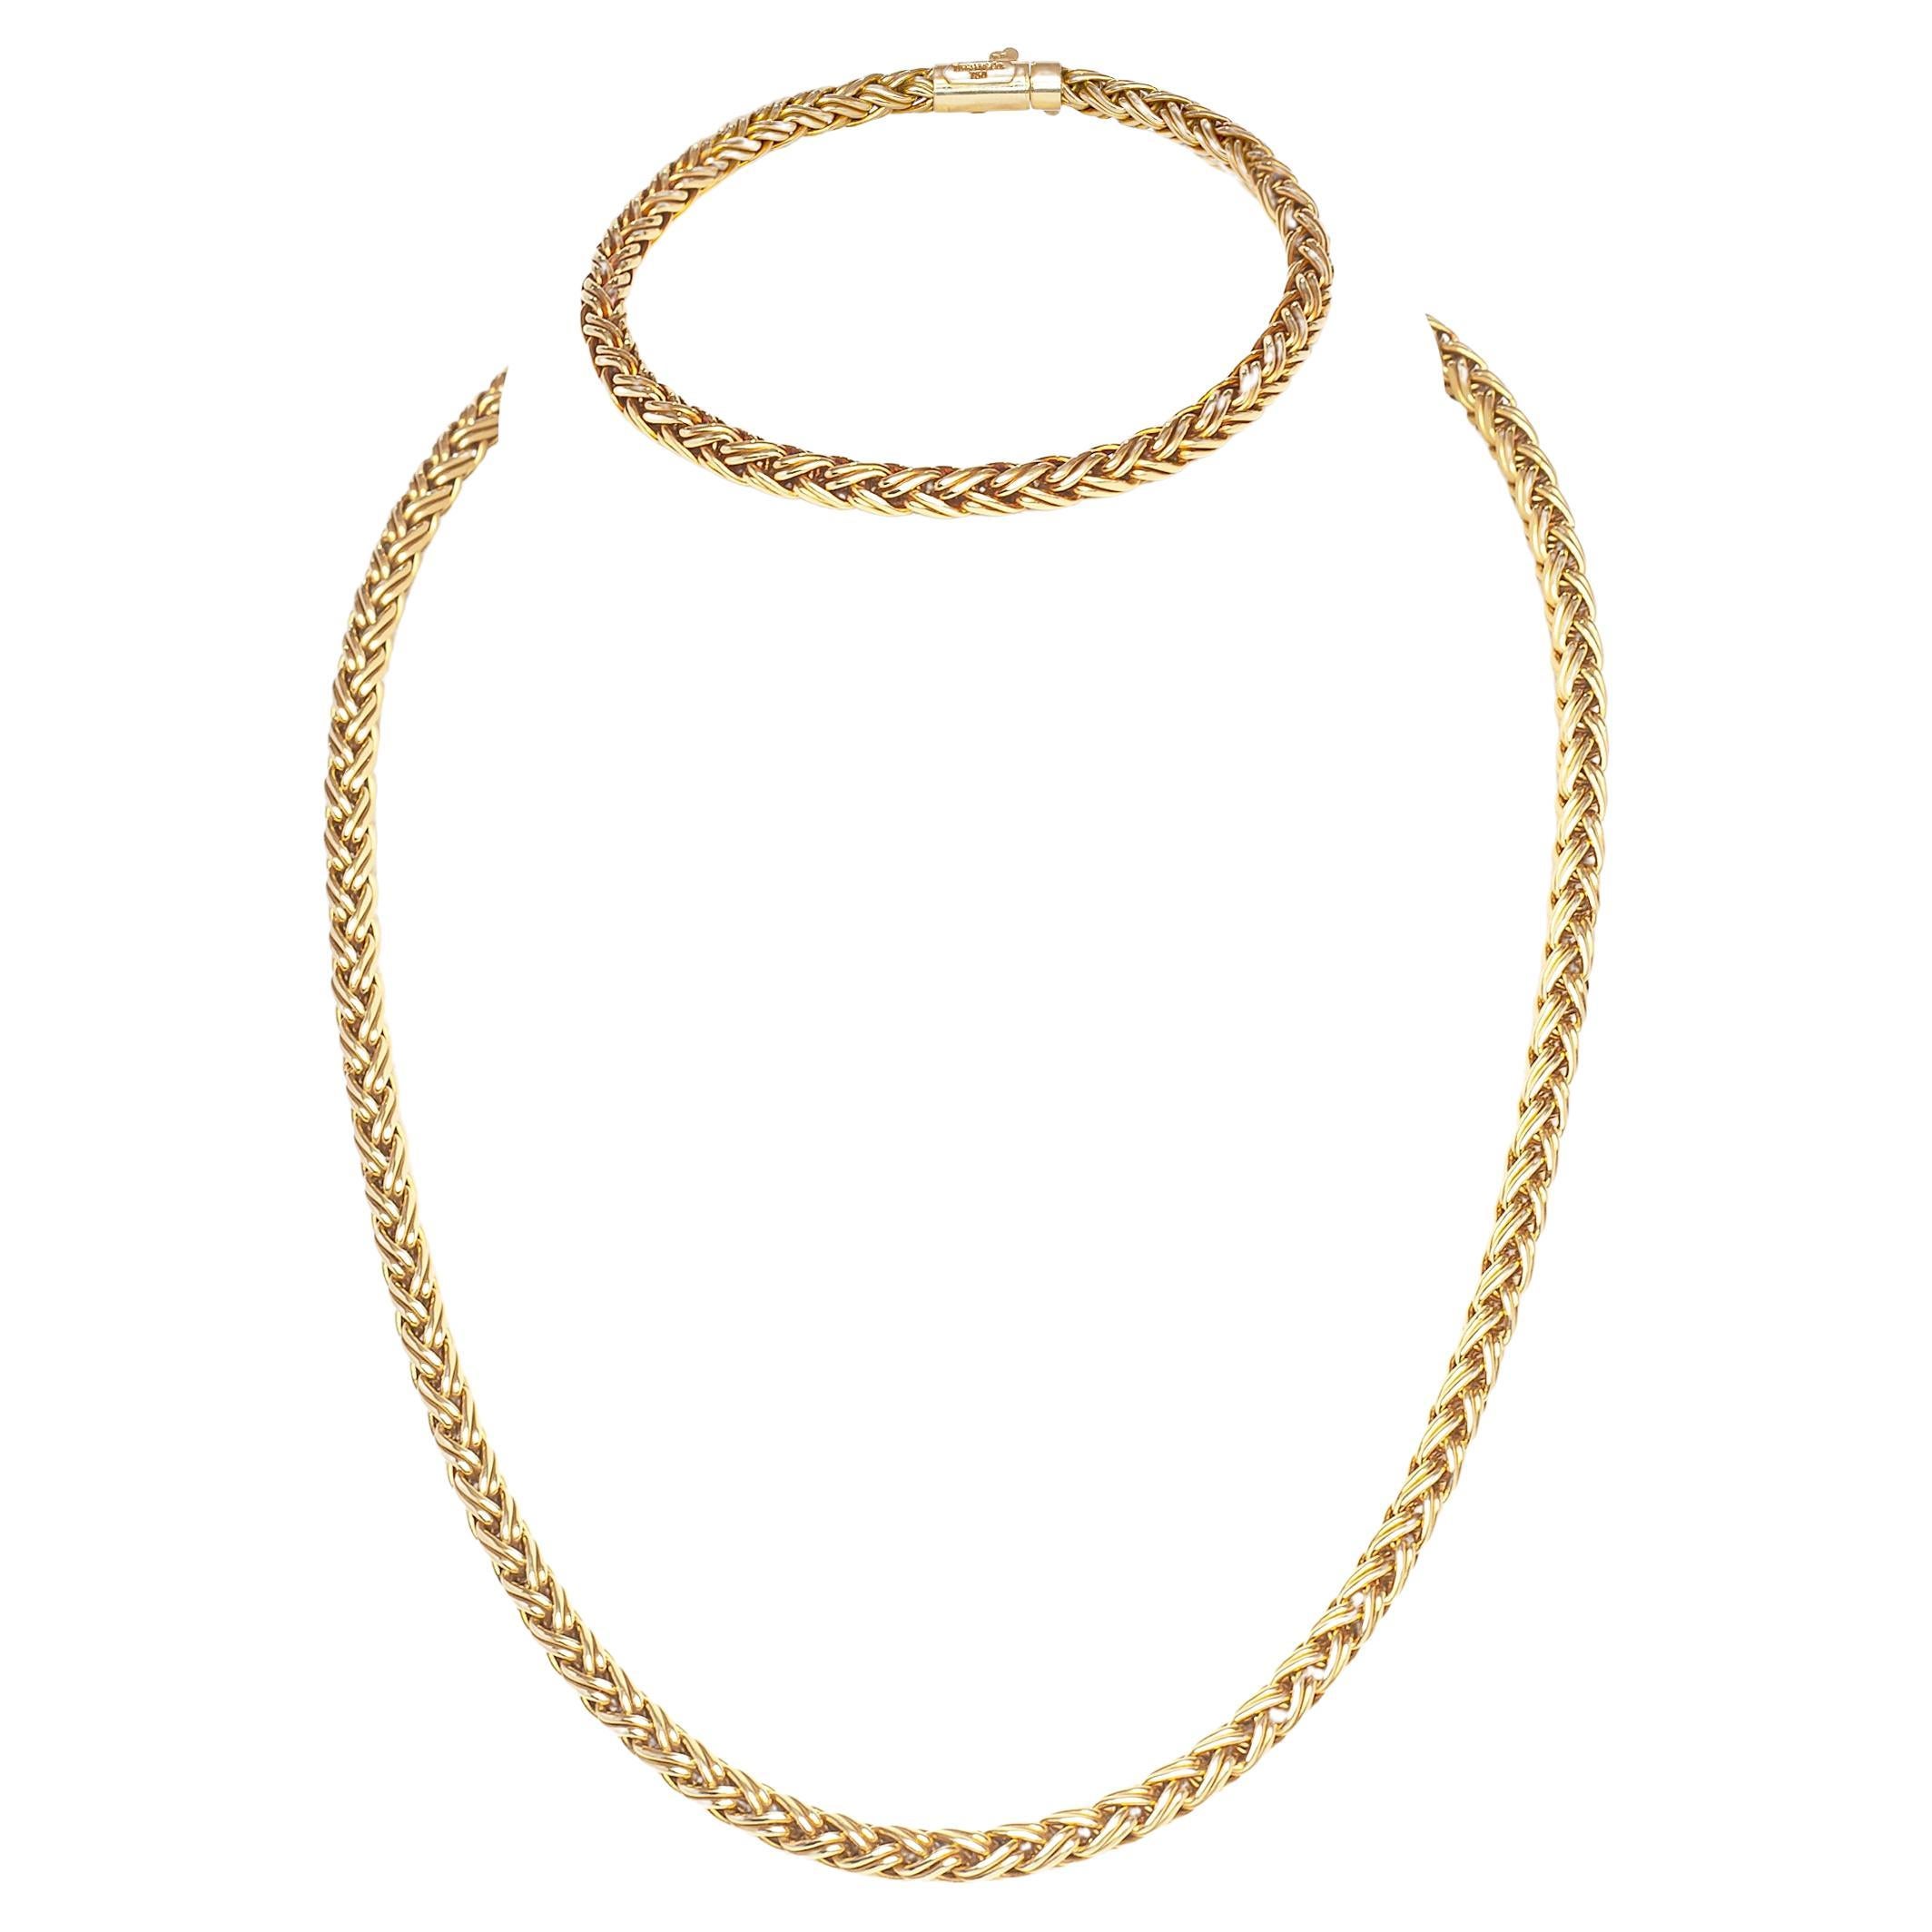 Tiffany & Co. 18 Carat Yellow Gold Braided Wheat Chain Necklace and Bracelet Set